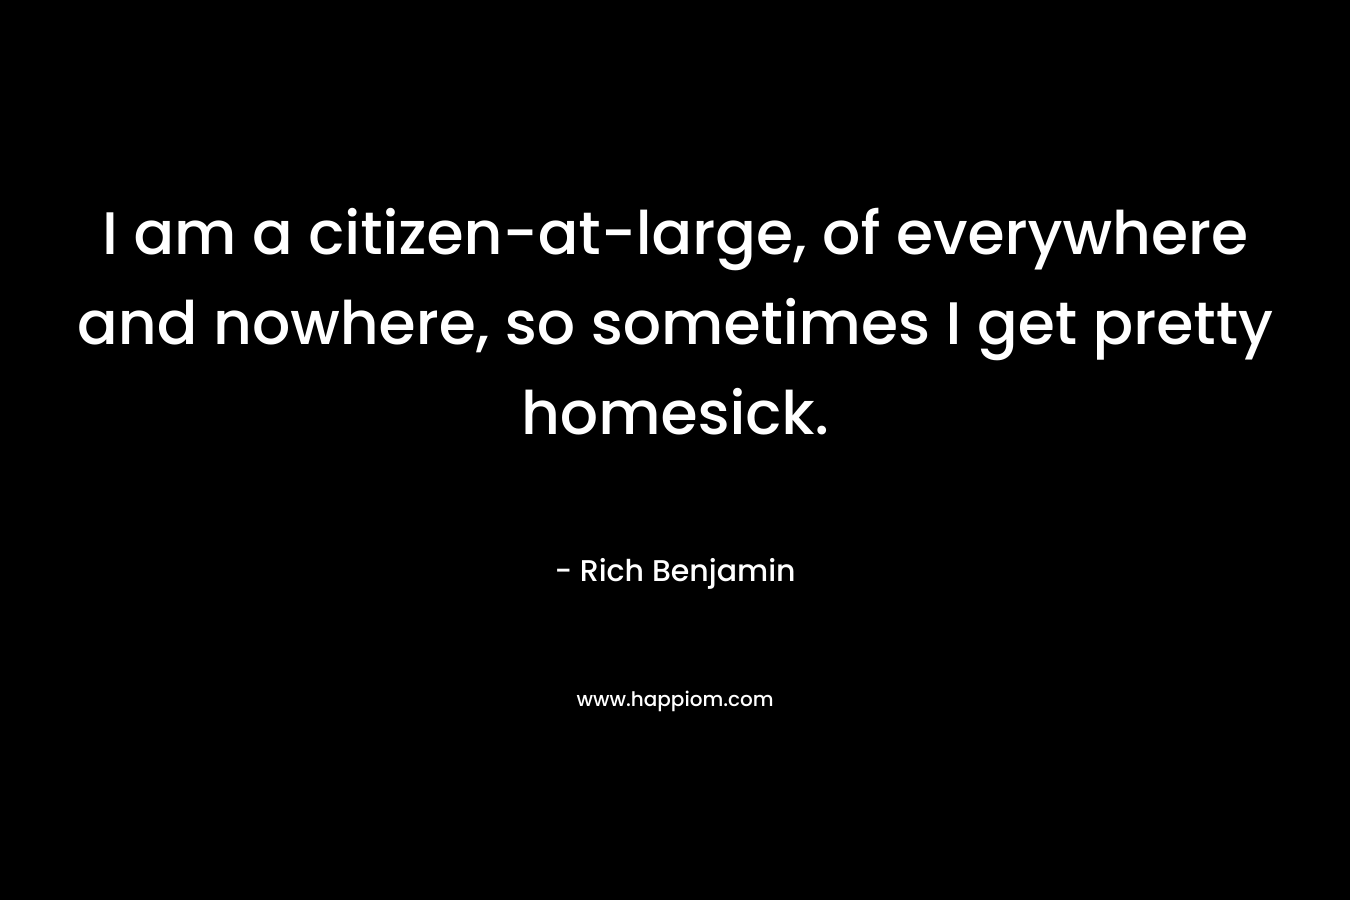 I am a citizen-at-large, of everywhere and nowhere, so sometimes I get pretty homesick.